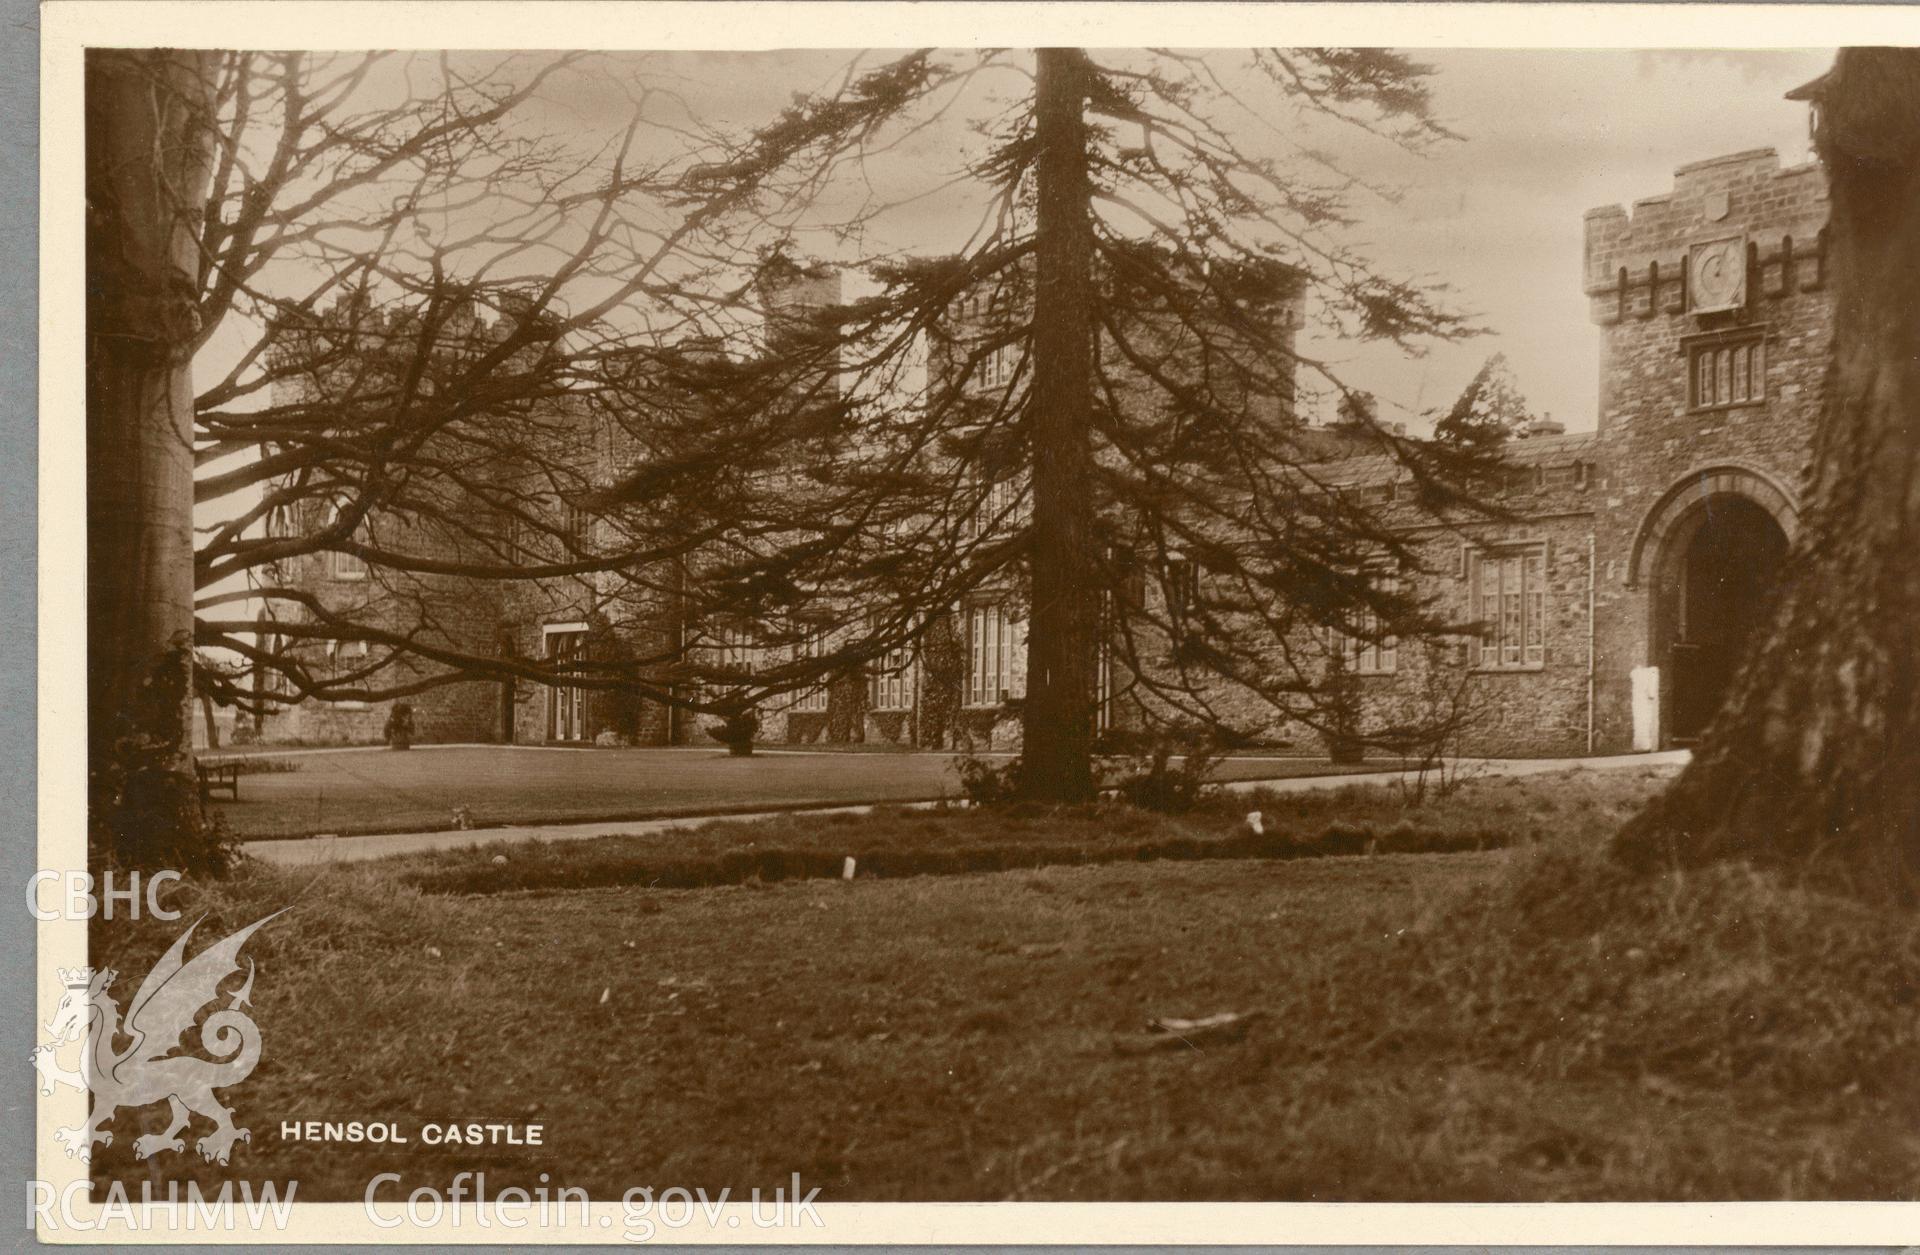 Digitised postcard image of Hensol castle, Pendoylan. Produced by Parks and Gardens Data Services, from an original item in the Peter Davis Collection at Parks and Gardens UK. We hold only web-resolution images of this collection, suitable for viewing on screen and for research purposes only. We do not hold the original images, or publication quality scans.